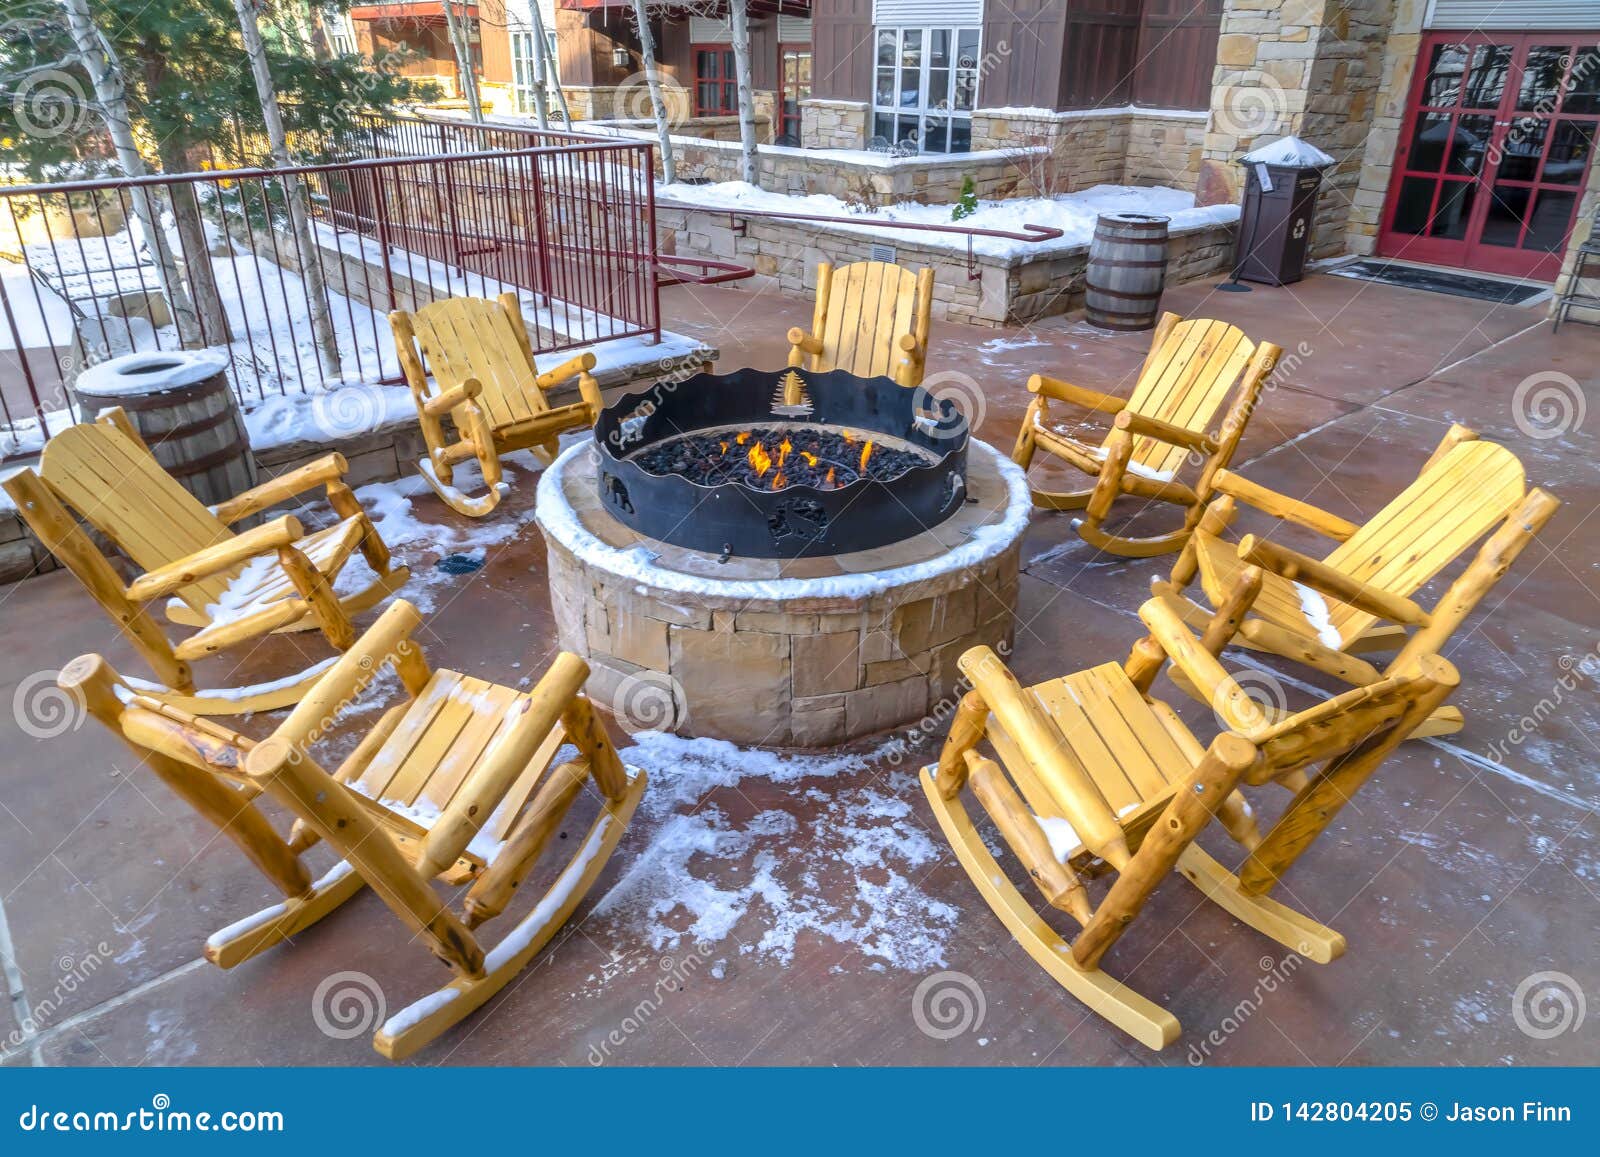 Patio with Wooden Rocking Chairs Around a Fire Pit Stock Image - Image